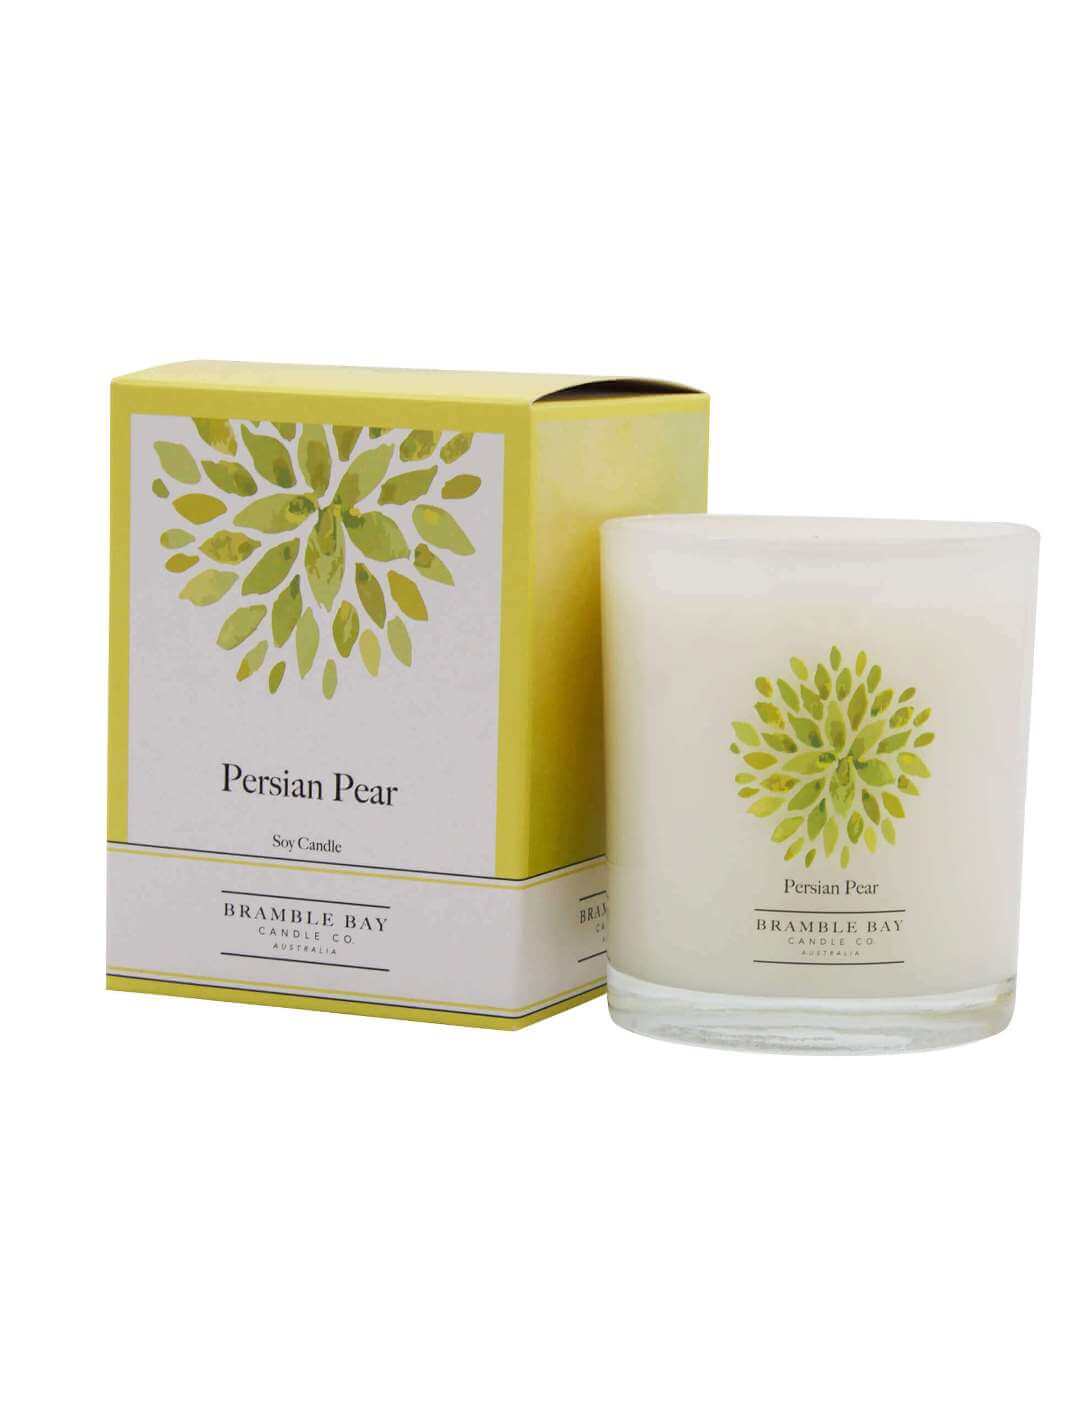 Persian Pear - triple scented candle, hand poured in Australia